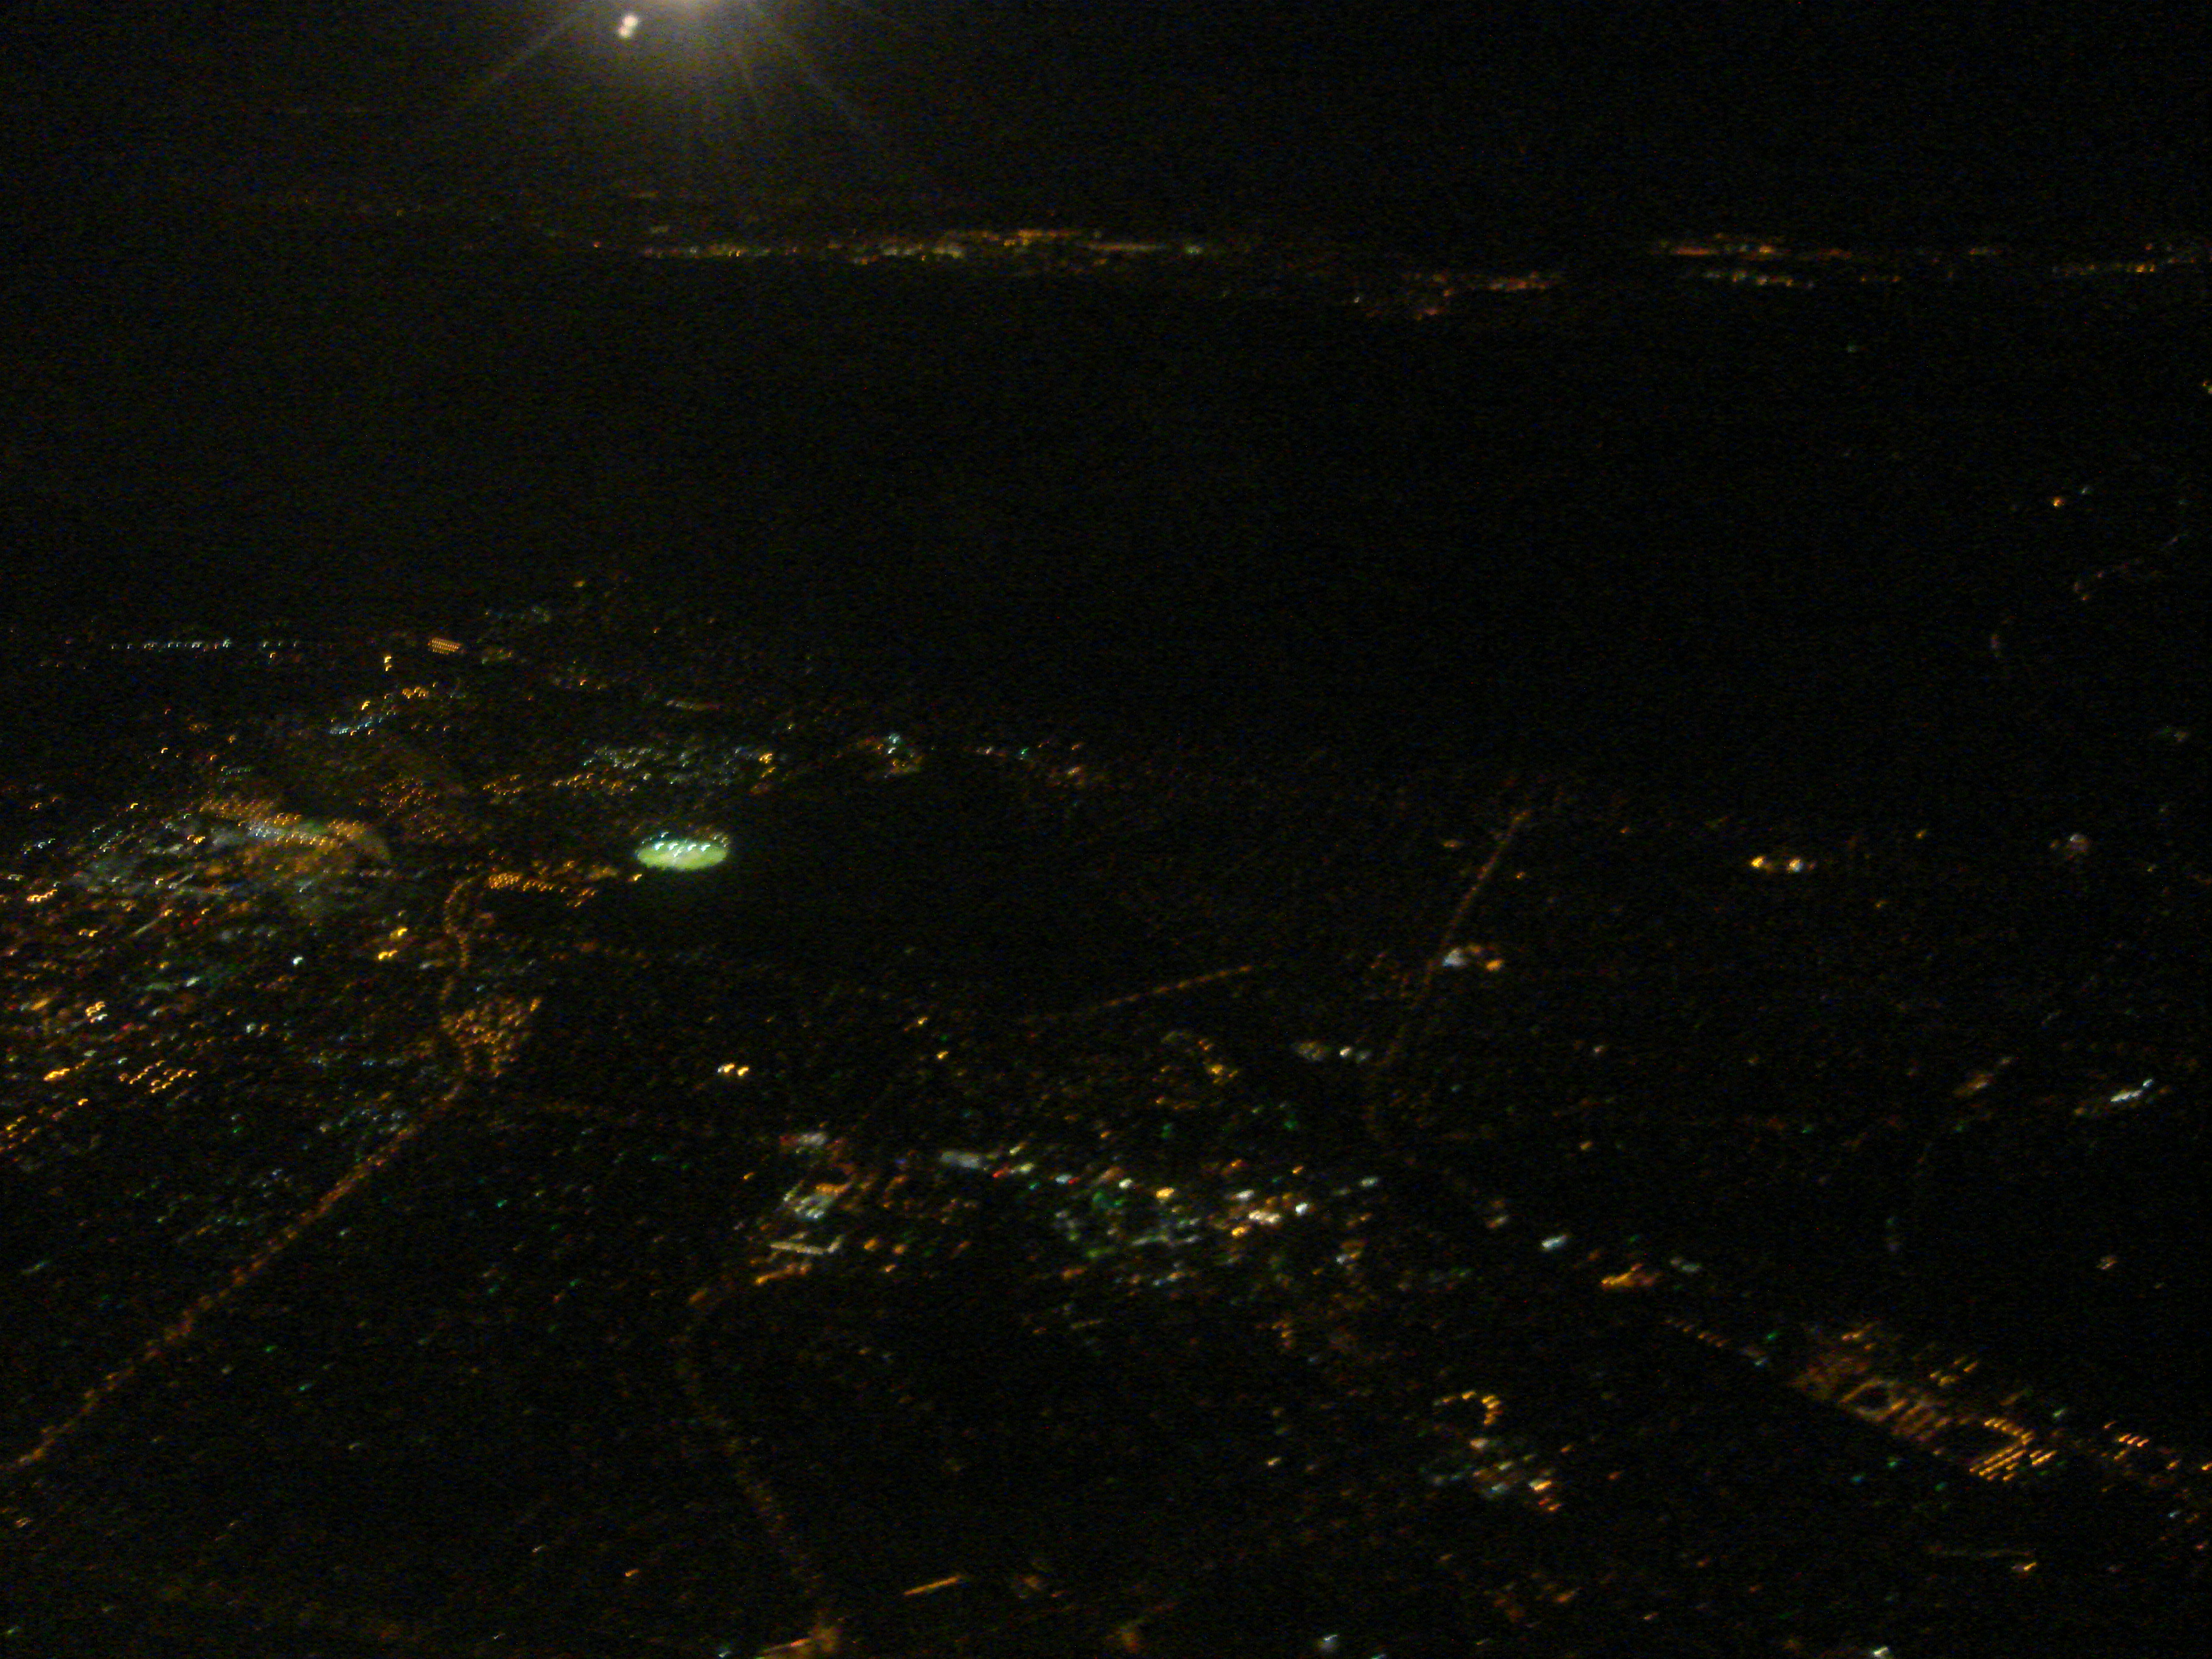 View out the window seat at night (a city in Jersey?)